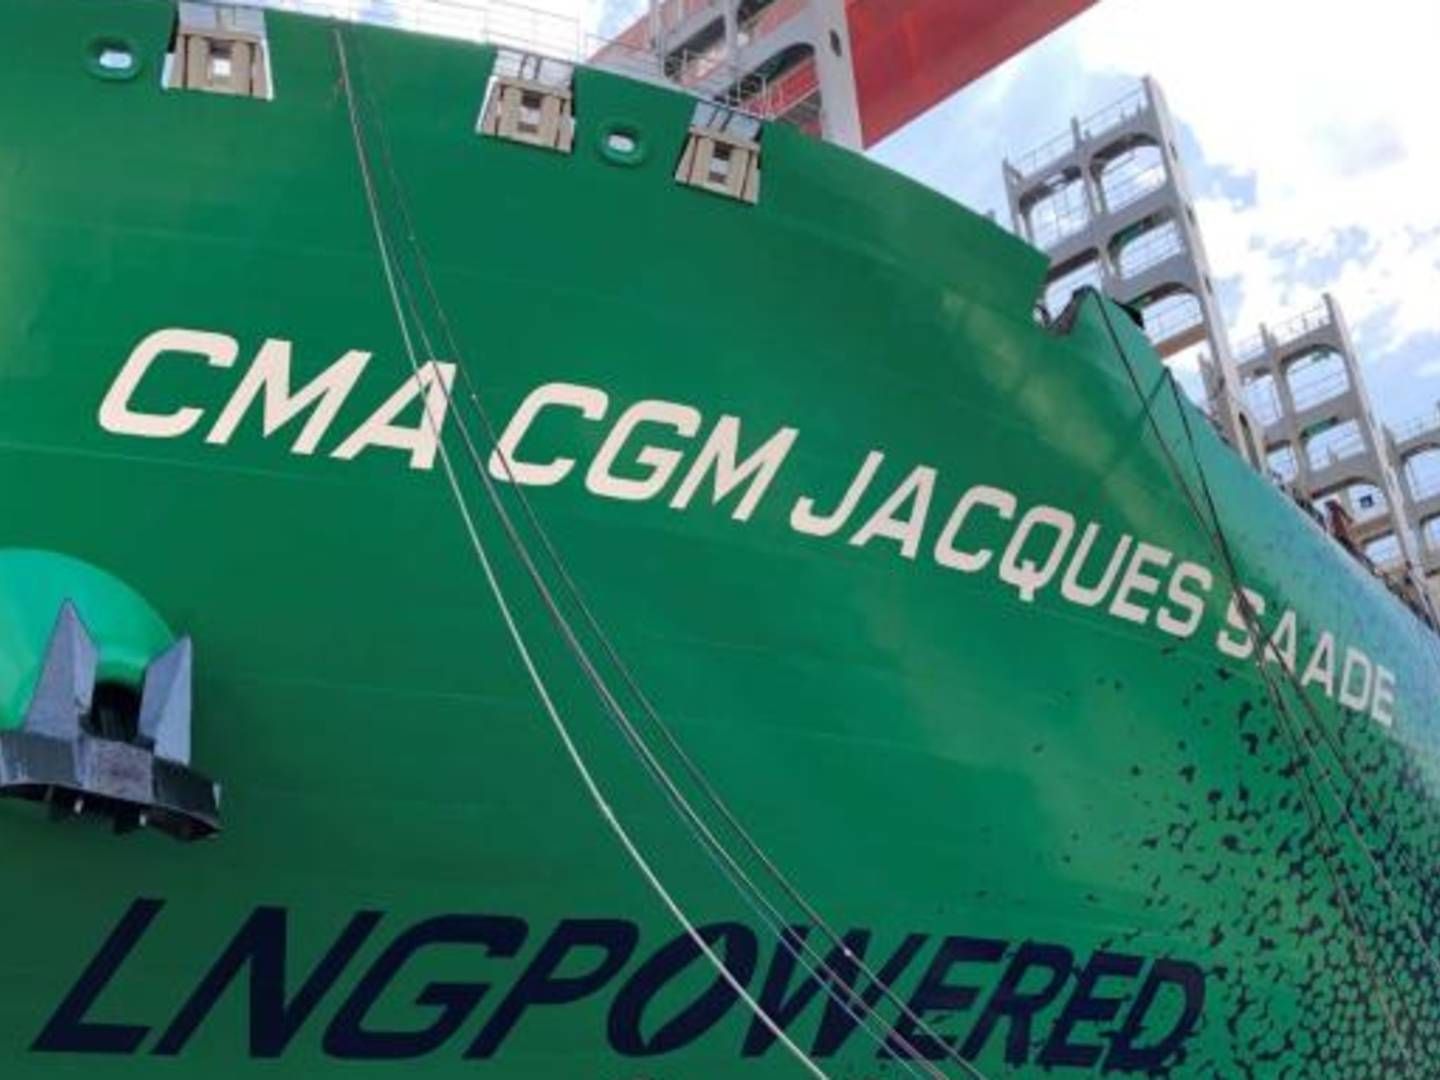 French carrierCMA CGM is betting heavily on constructing dual-fuel container ships capable of sailing on both LNG and heavy fuel. | Photo: PR/CMA CGM